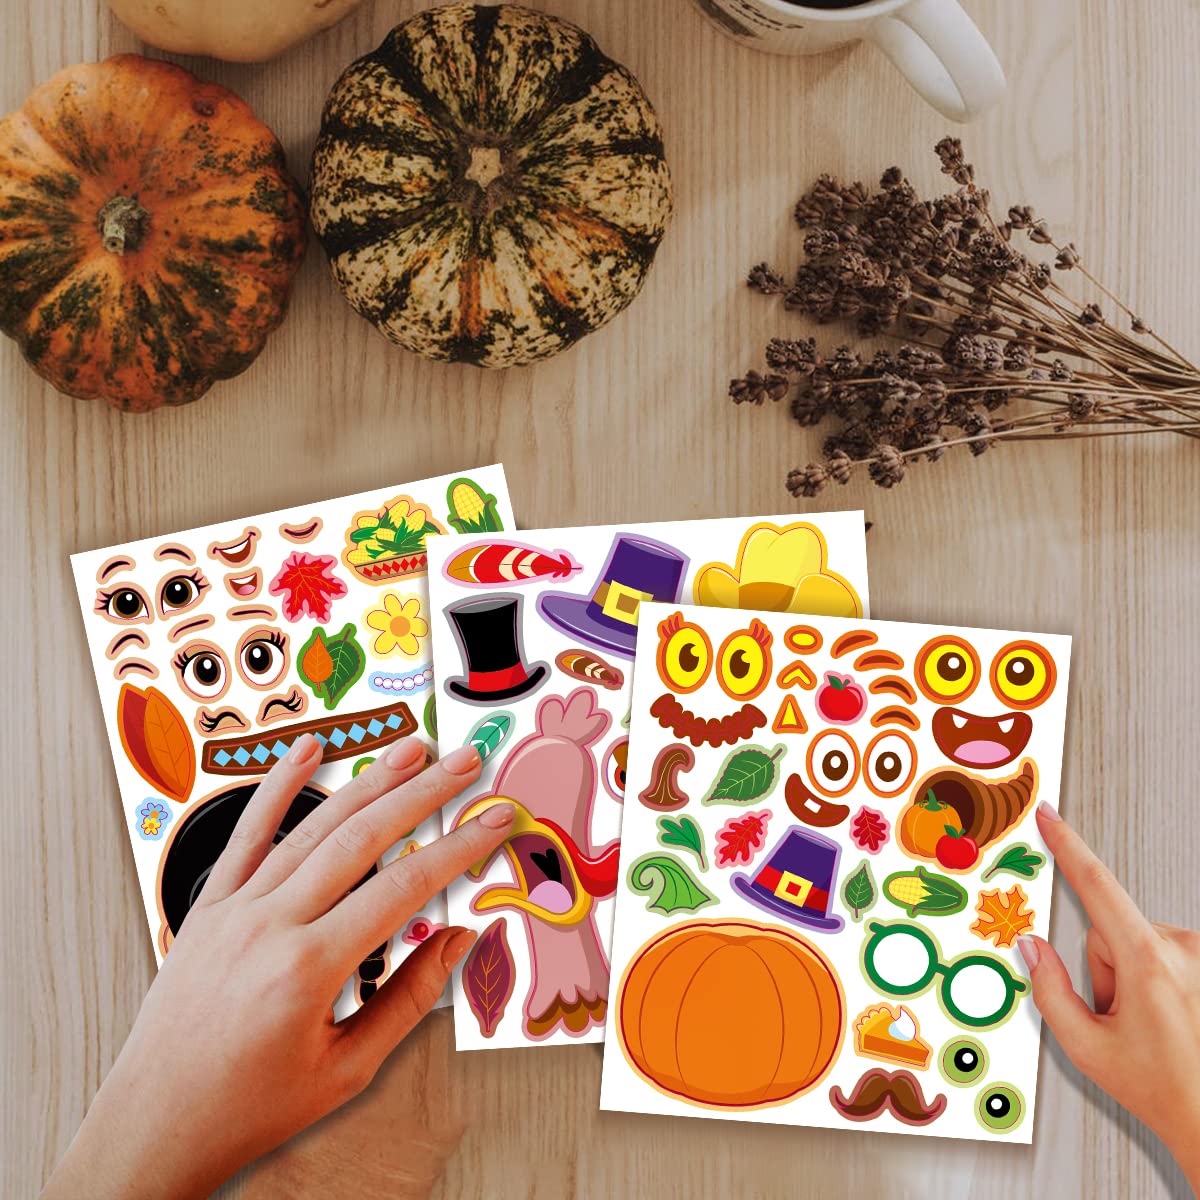 JOYIN 40 PCS Thanksgiving Crafts Make A Turkey Sticker Make A Face Sticker Sheets Make Your Own Characters Thanksgiving Game Holiday School Classroom Prizes Party Favor Supplies